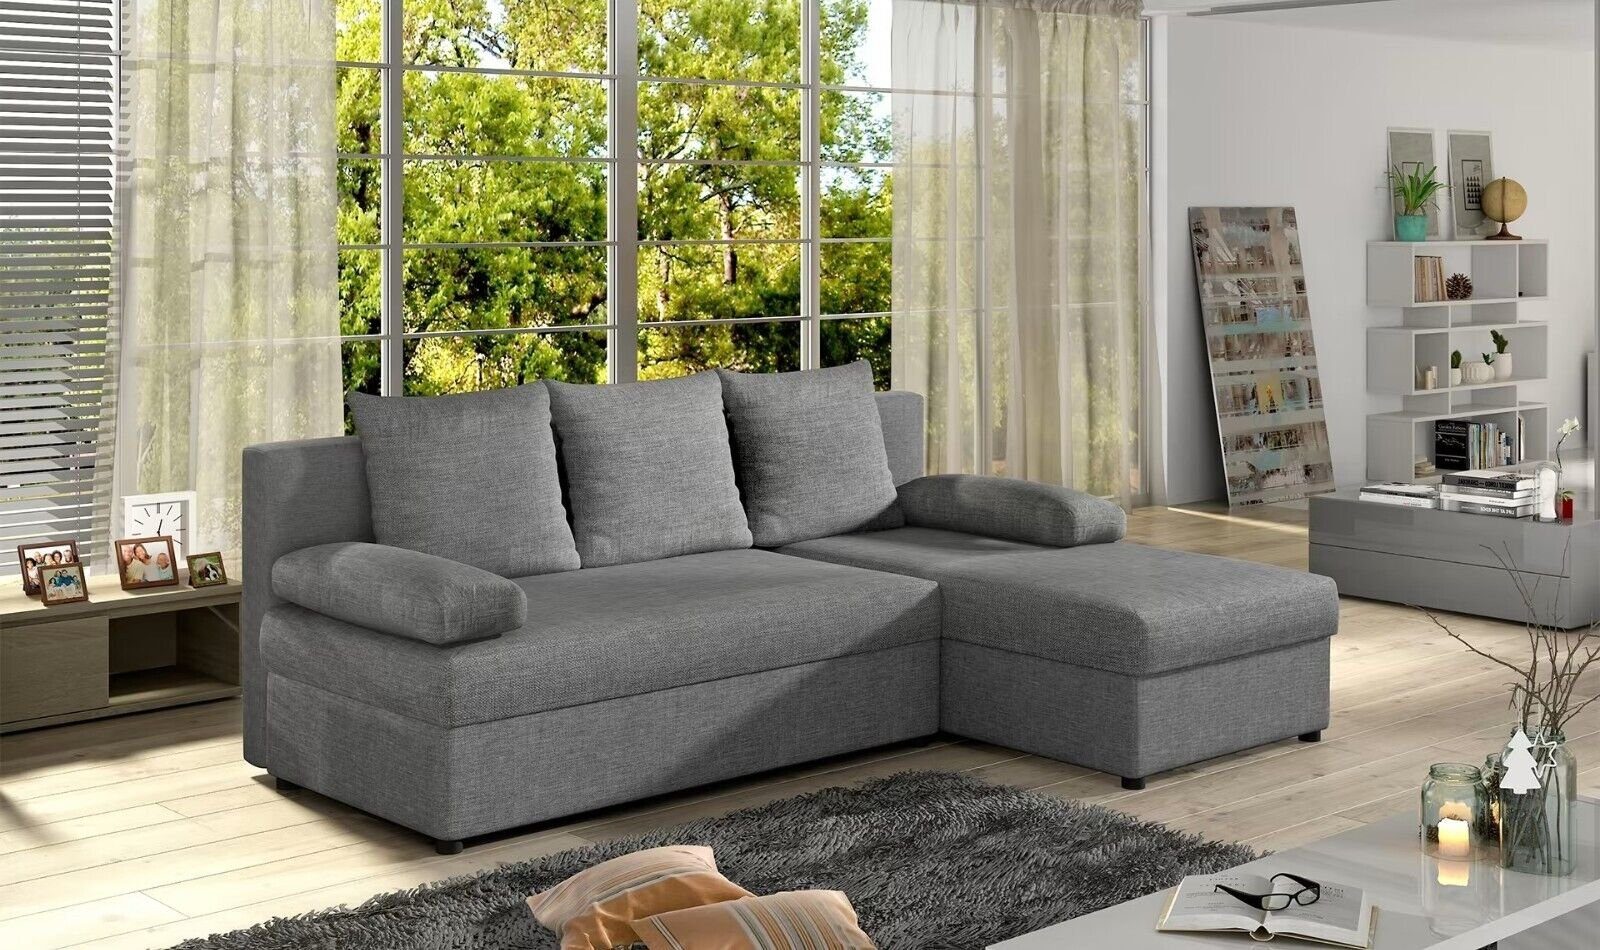 JVmoebel Ecksofa Design Sofa L-Form Couch Polster Schlafsofa Bettfunktion Couch Sofort, Made in Europe Grau